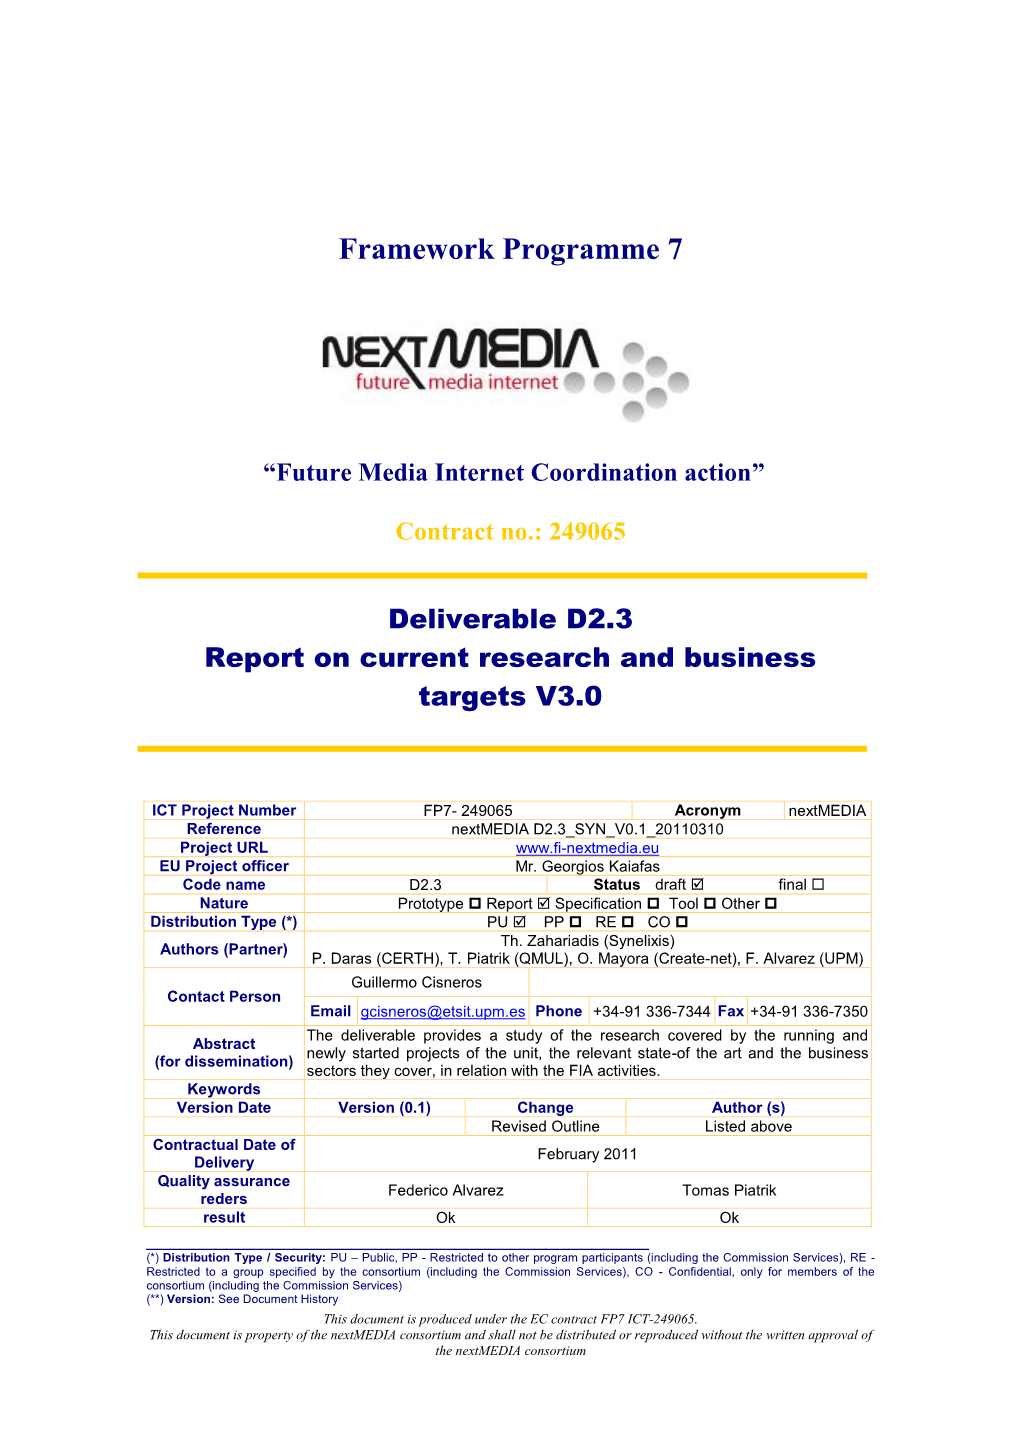 D2.3 Report on Current Research and Business Targets V3.0